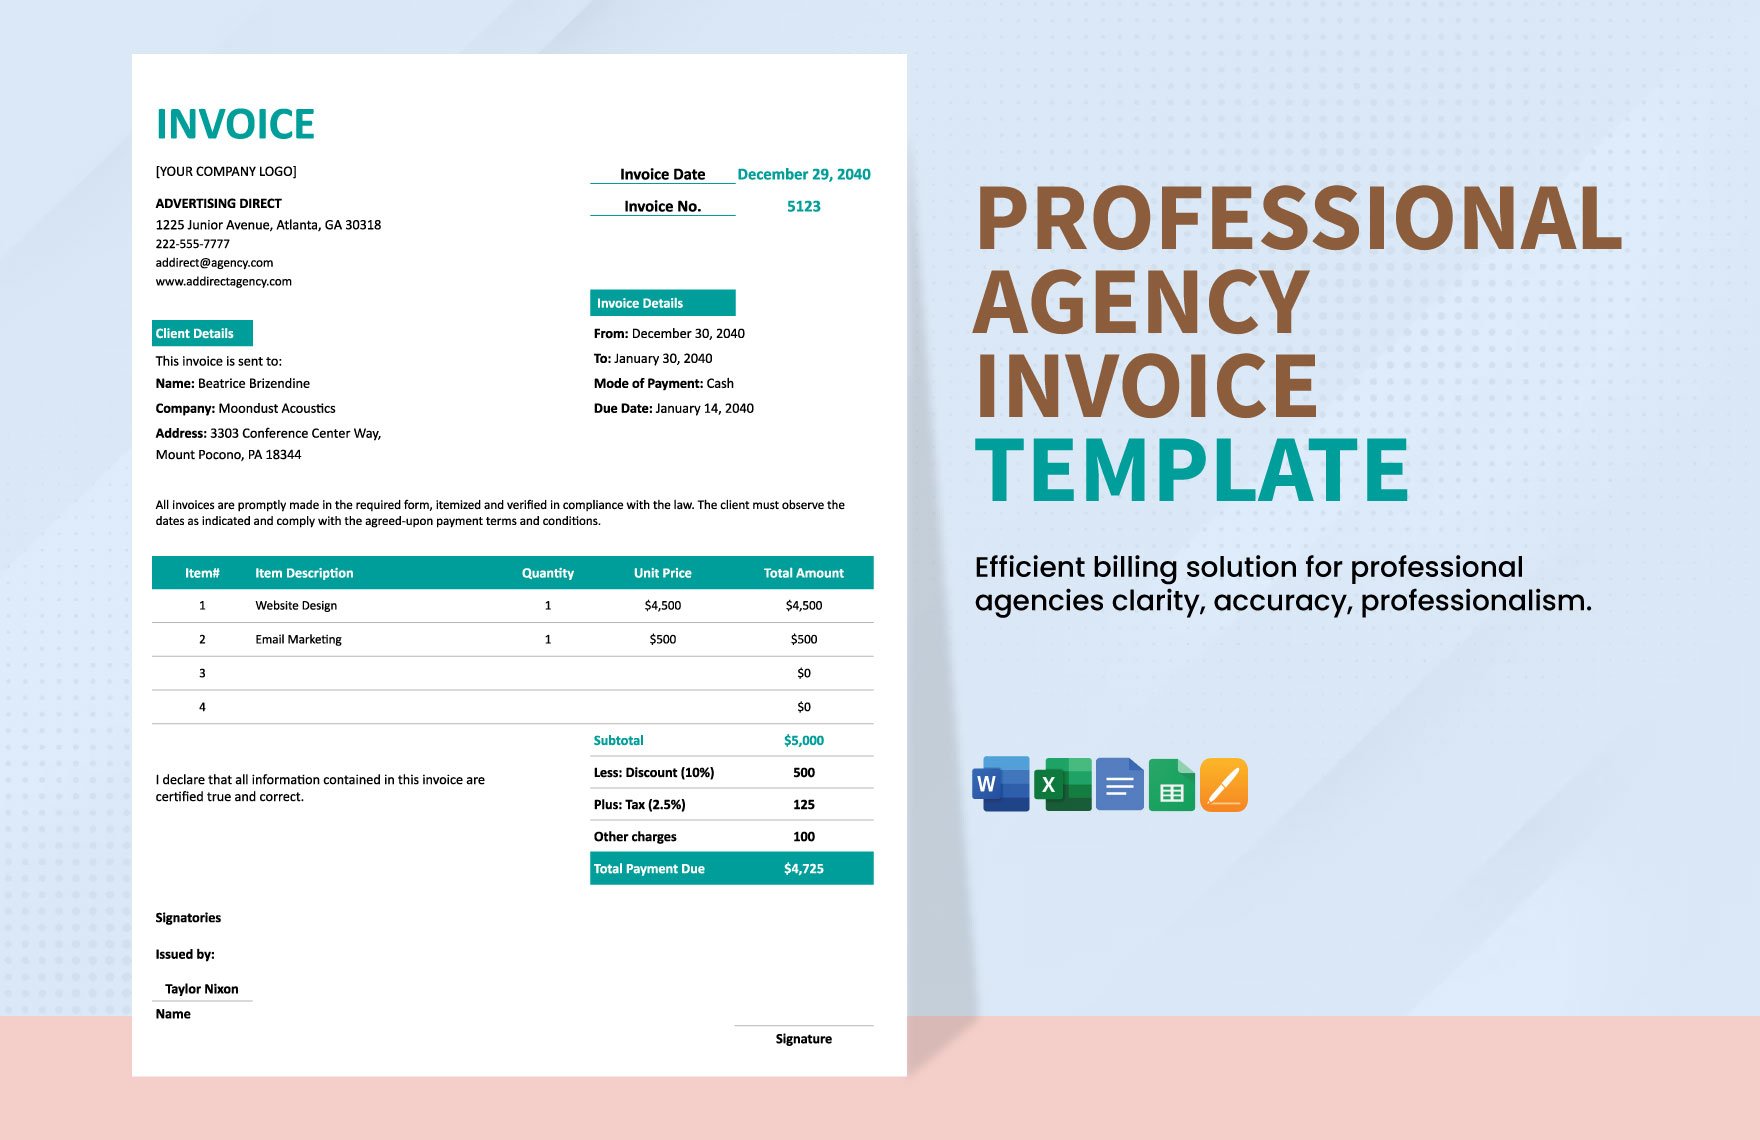 Professional Agency Invoice Template